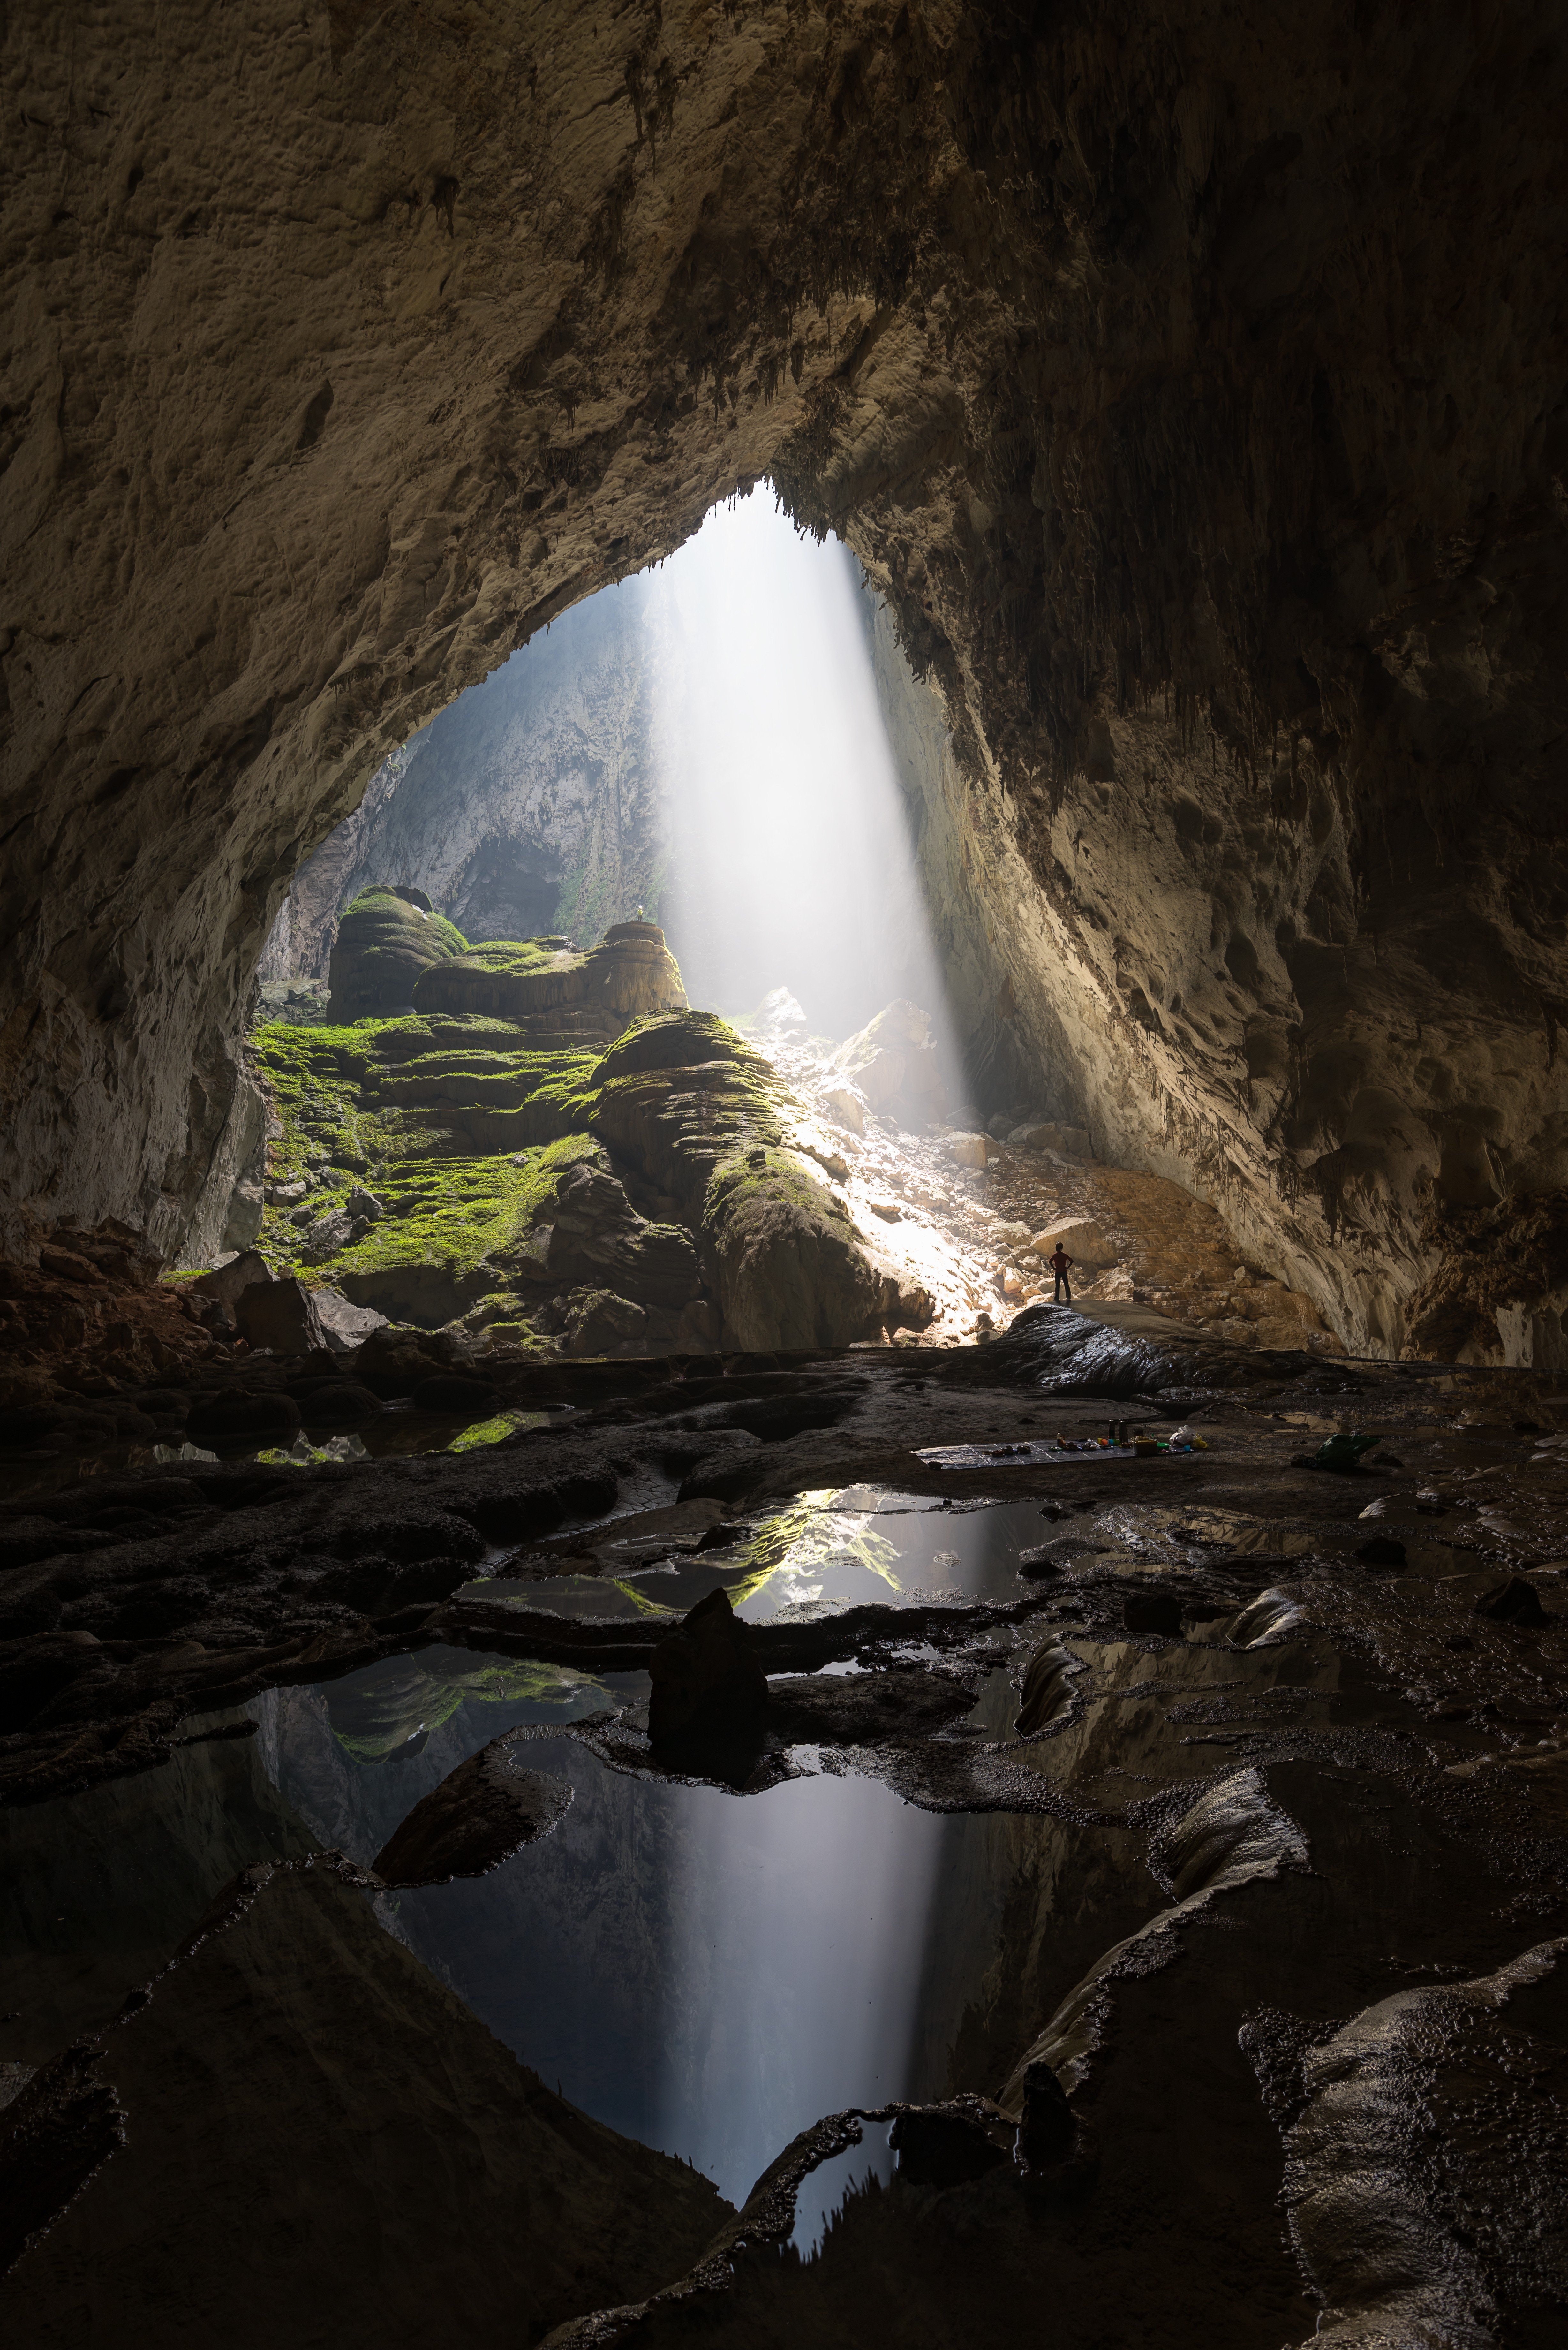 Sunlight streams down from a doline in a section of a cave in the Phong Nha mountains in Vietnam. Phong Nha is just one of Vietnam’s lesser known destinations that are worth visiting. Photo: Getty Images